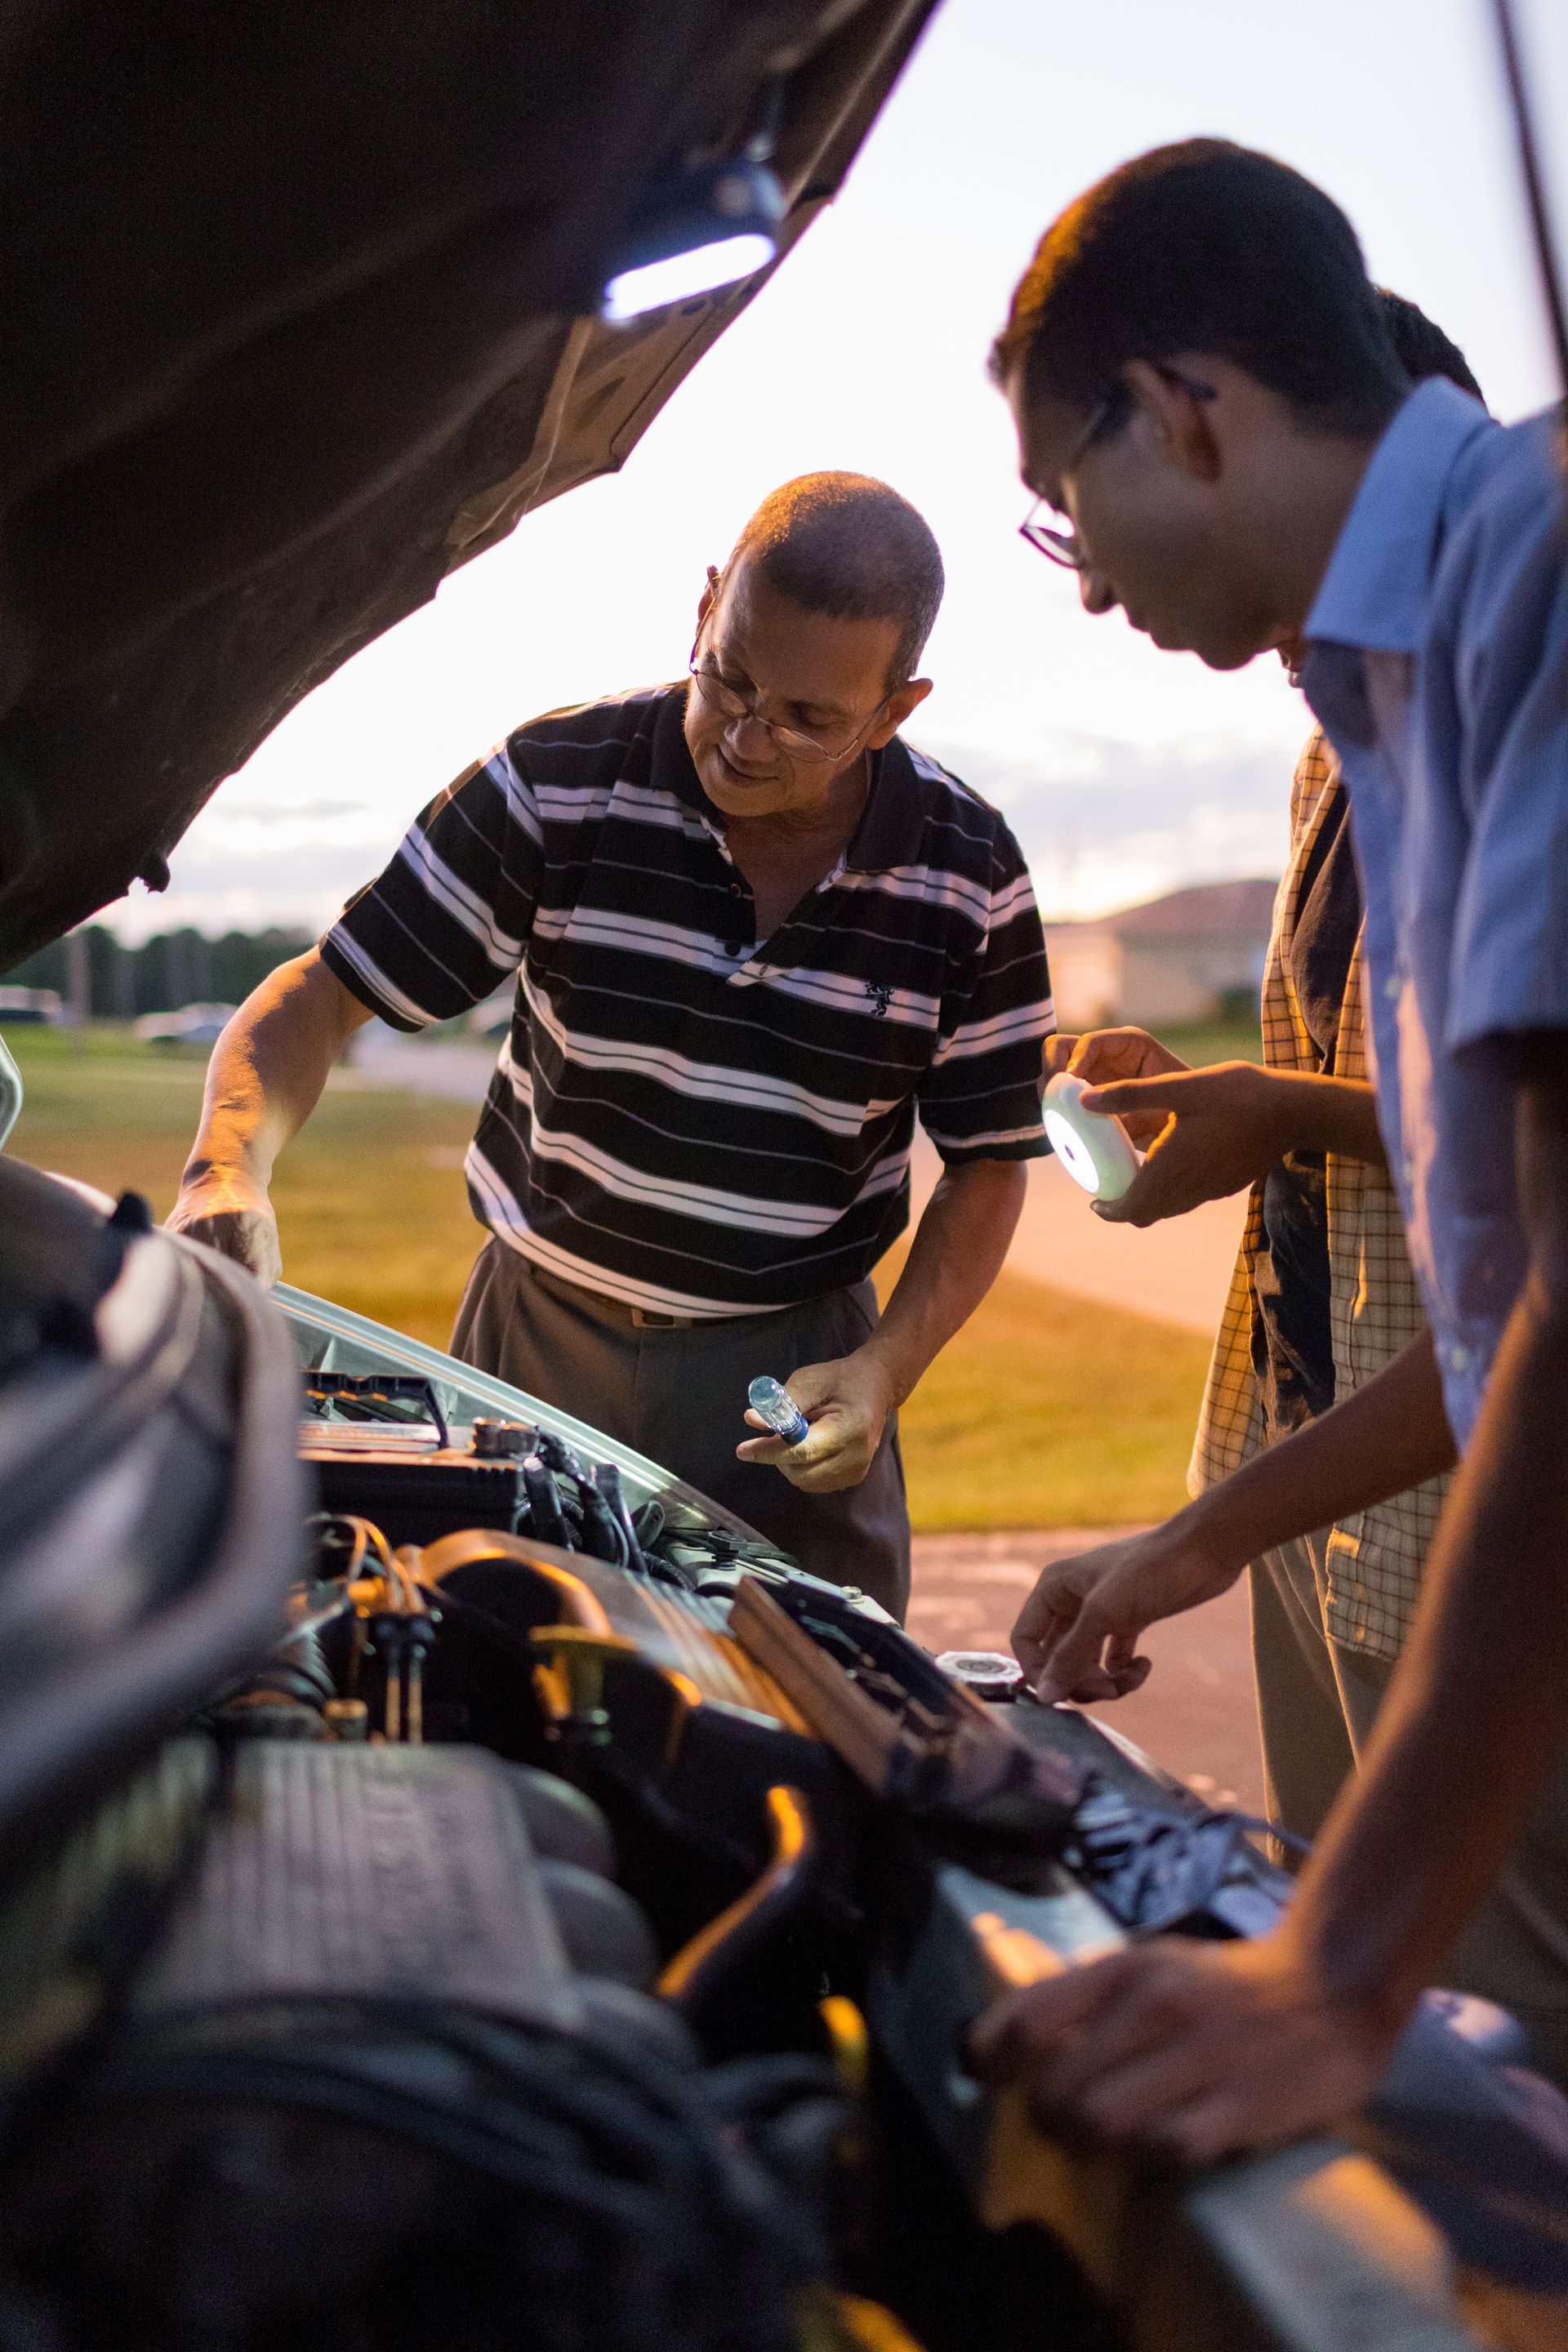 A father teaches two of his sons how to do car repairs.